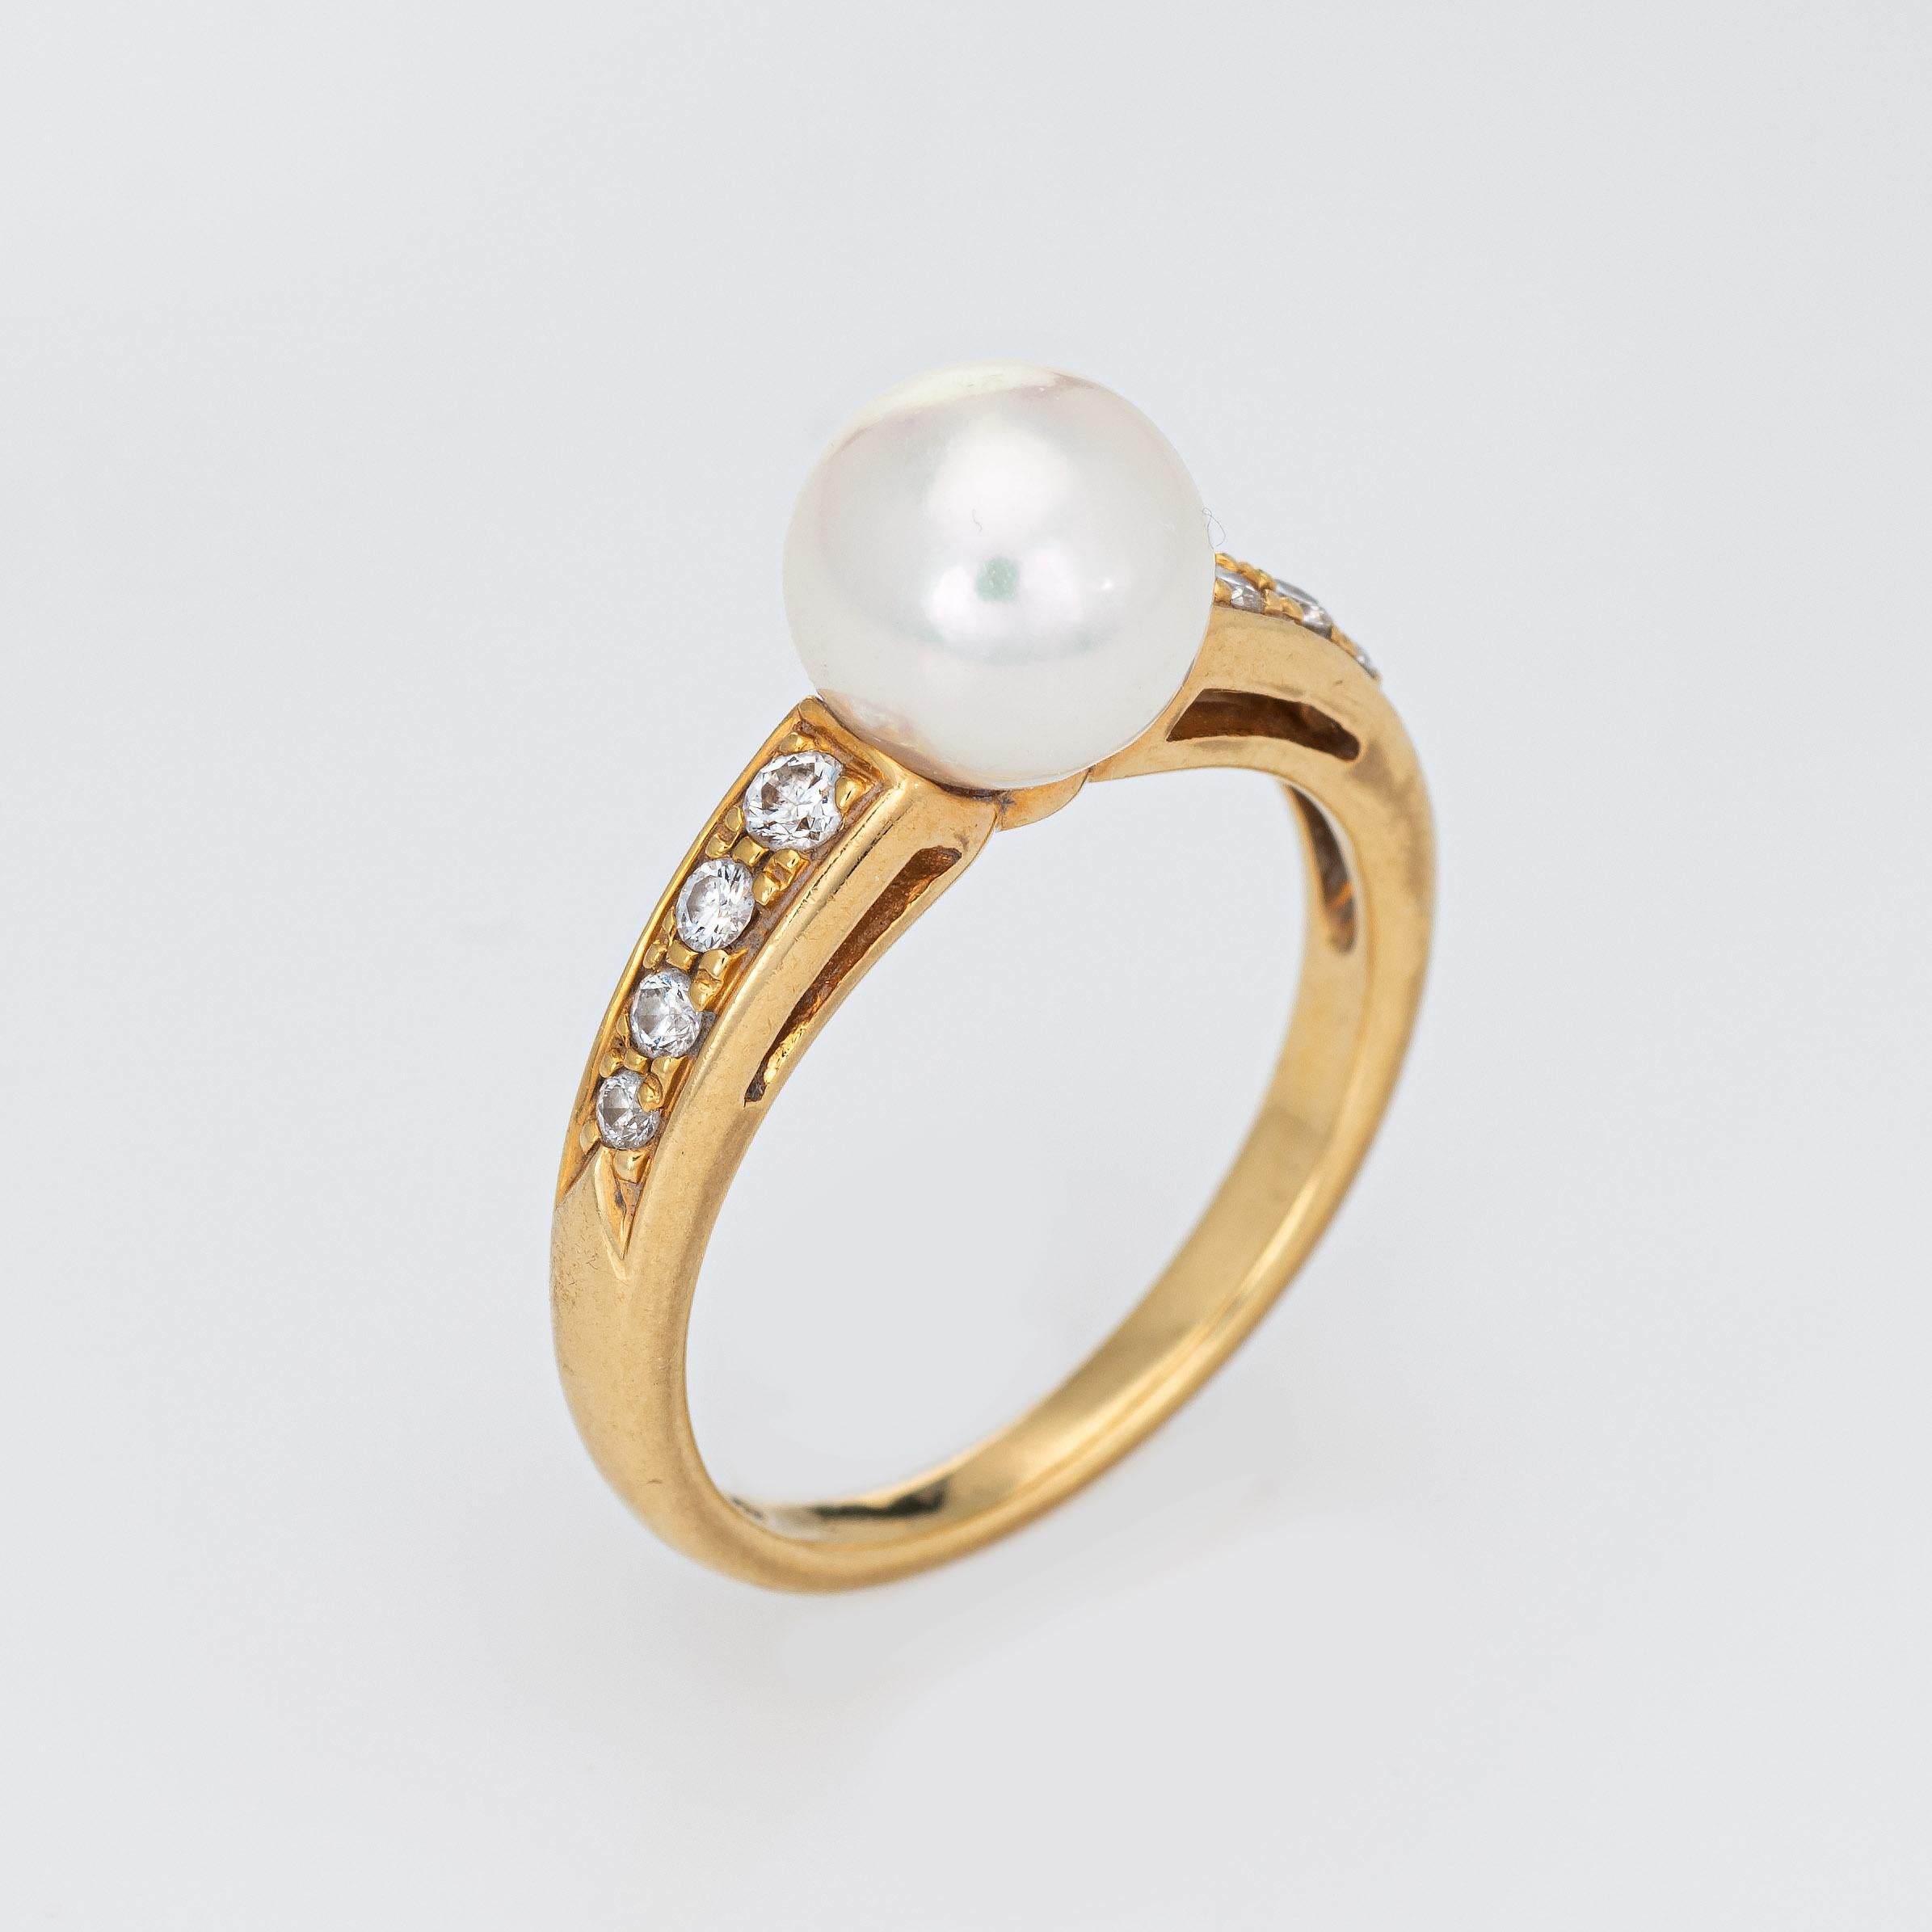 Elegant Mikimoto cultured Akoya pearl & diamond ring crafted in 18k yellow gold. 

8mm cultured Akoya pearl is accented with an estimated 0.20 carats of diamonds (estimated at G-H color and VS clarity). The pearls is lustrous and show rose